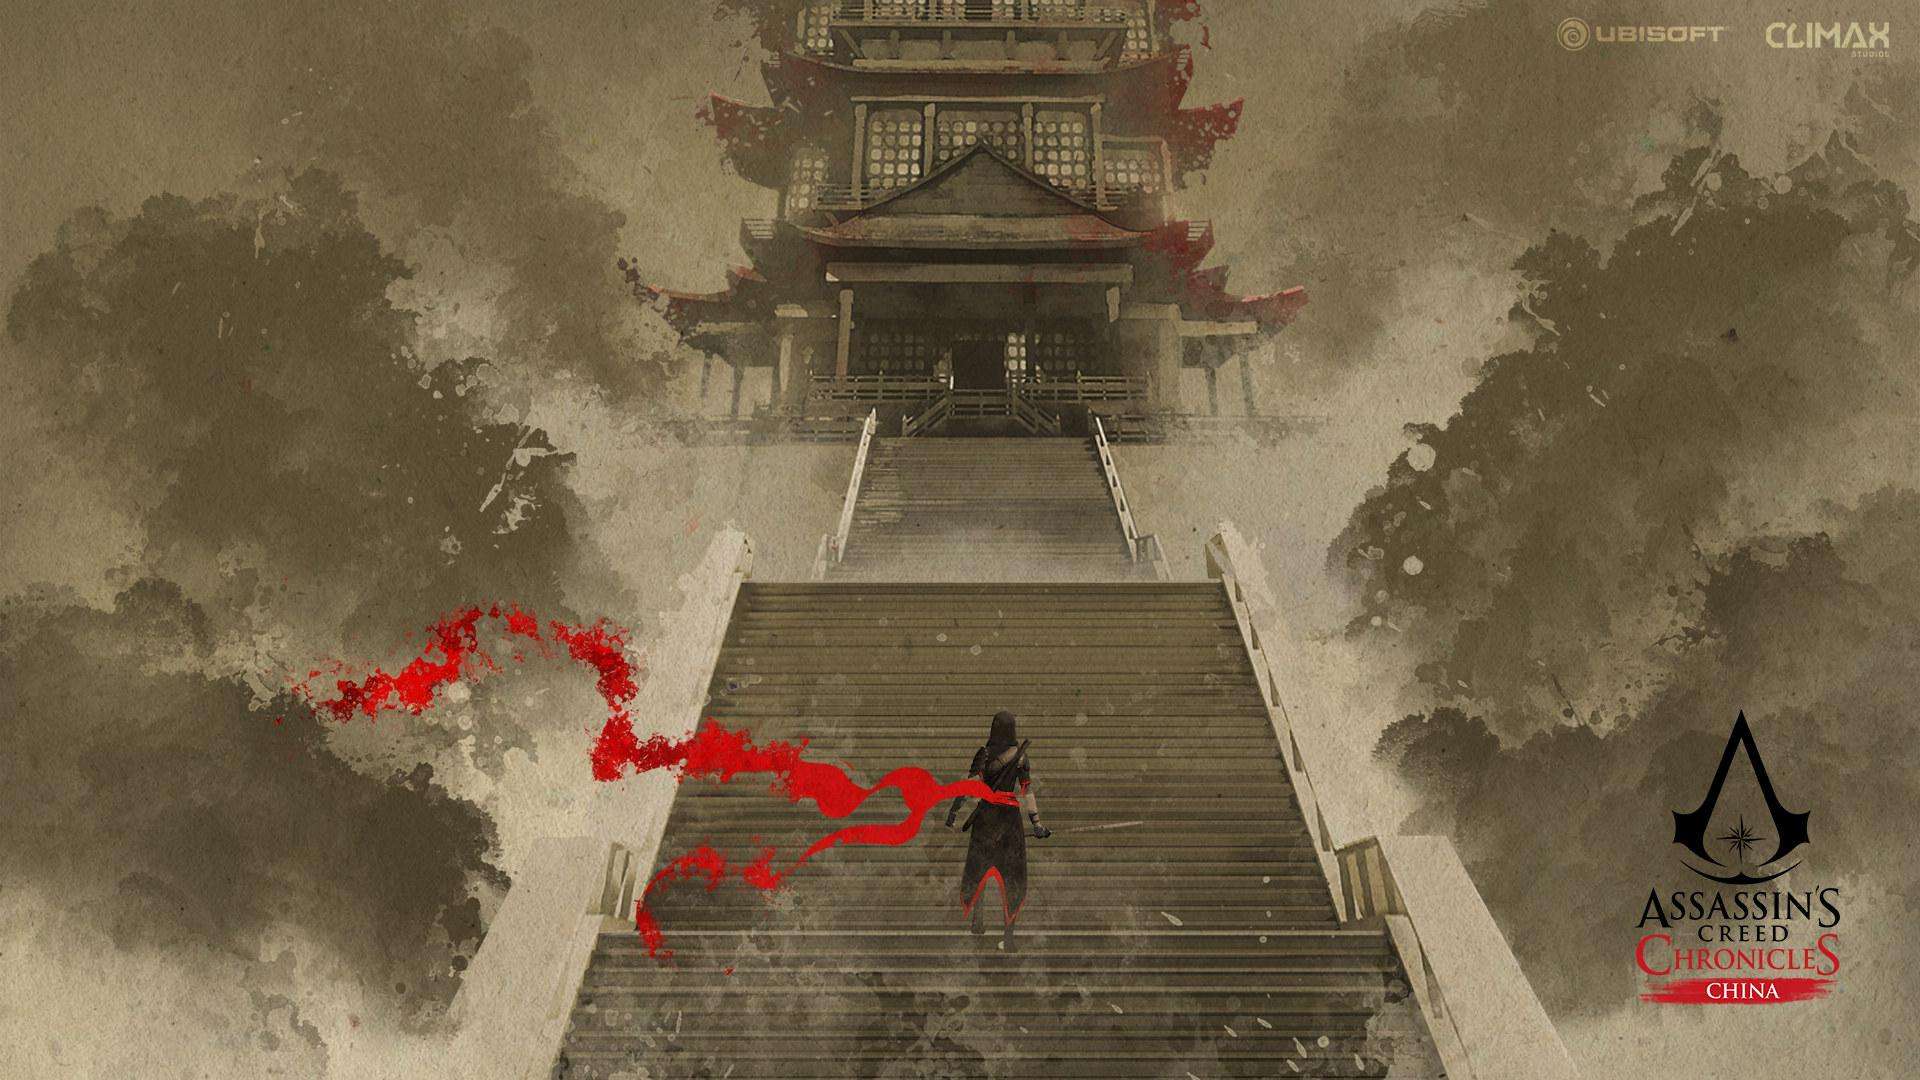 Assassins Creed Chinese Architecture Video Games Assassins Creed Chronicles 1920x1080